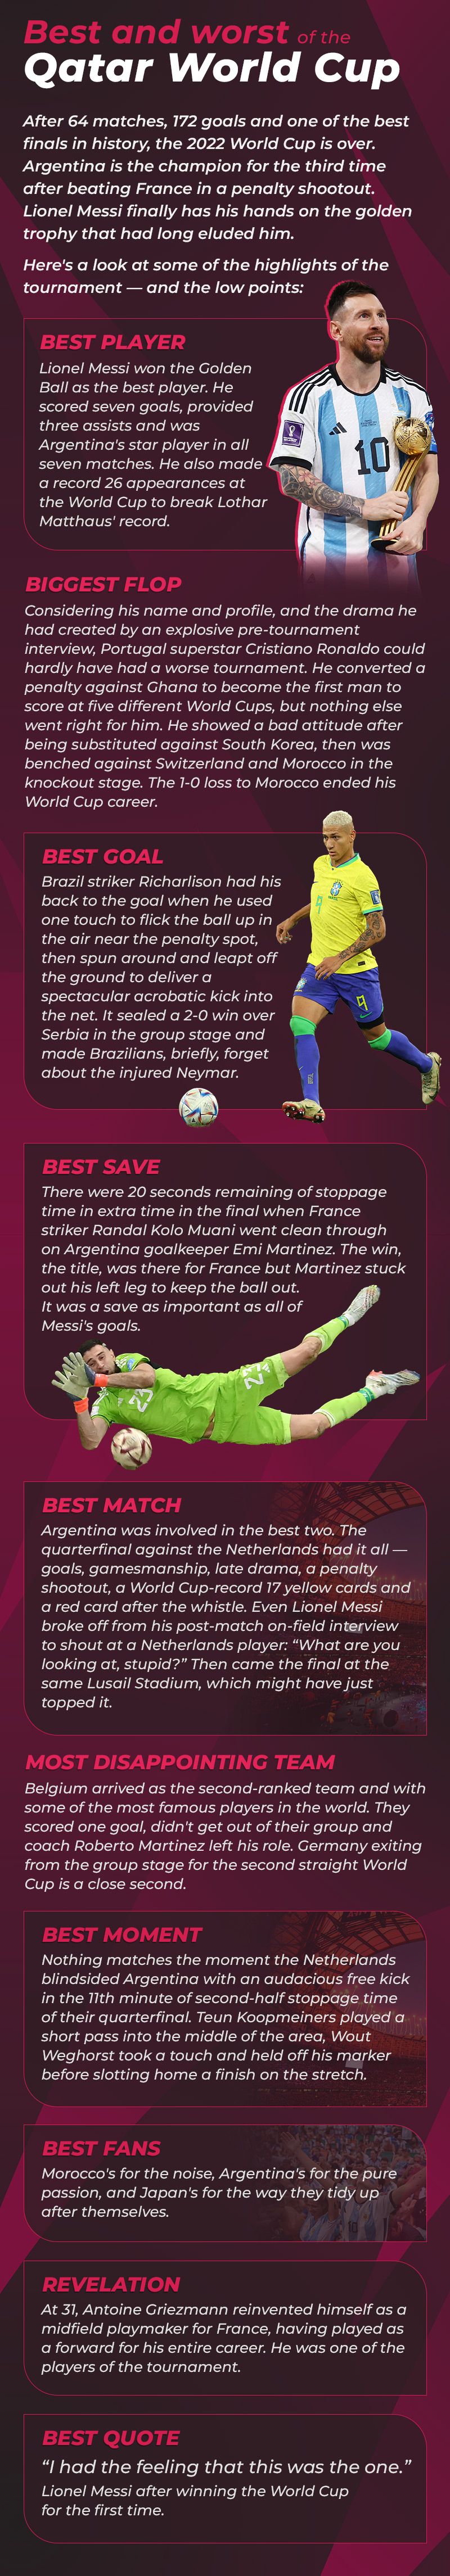 Best and Worst of Qatar World Cup 